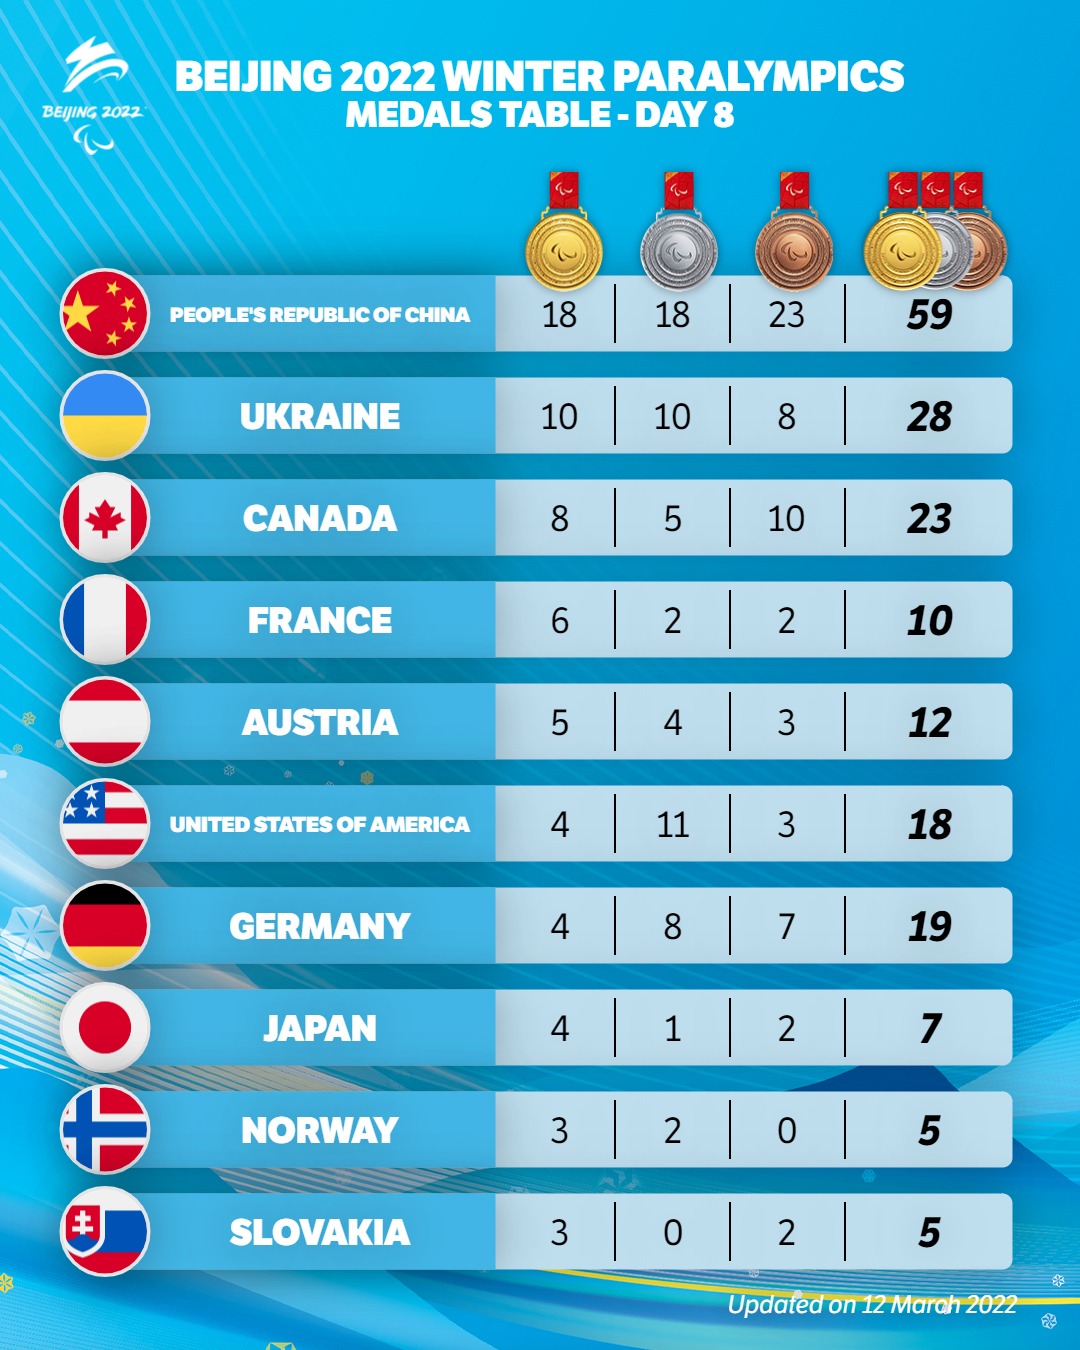 Winter Paralympics medals table after Day 8 with People's Republic of China, Ukraine and Canada leading